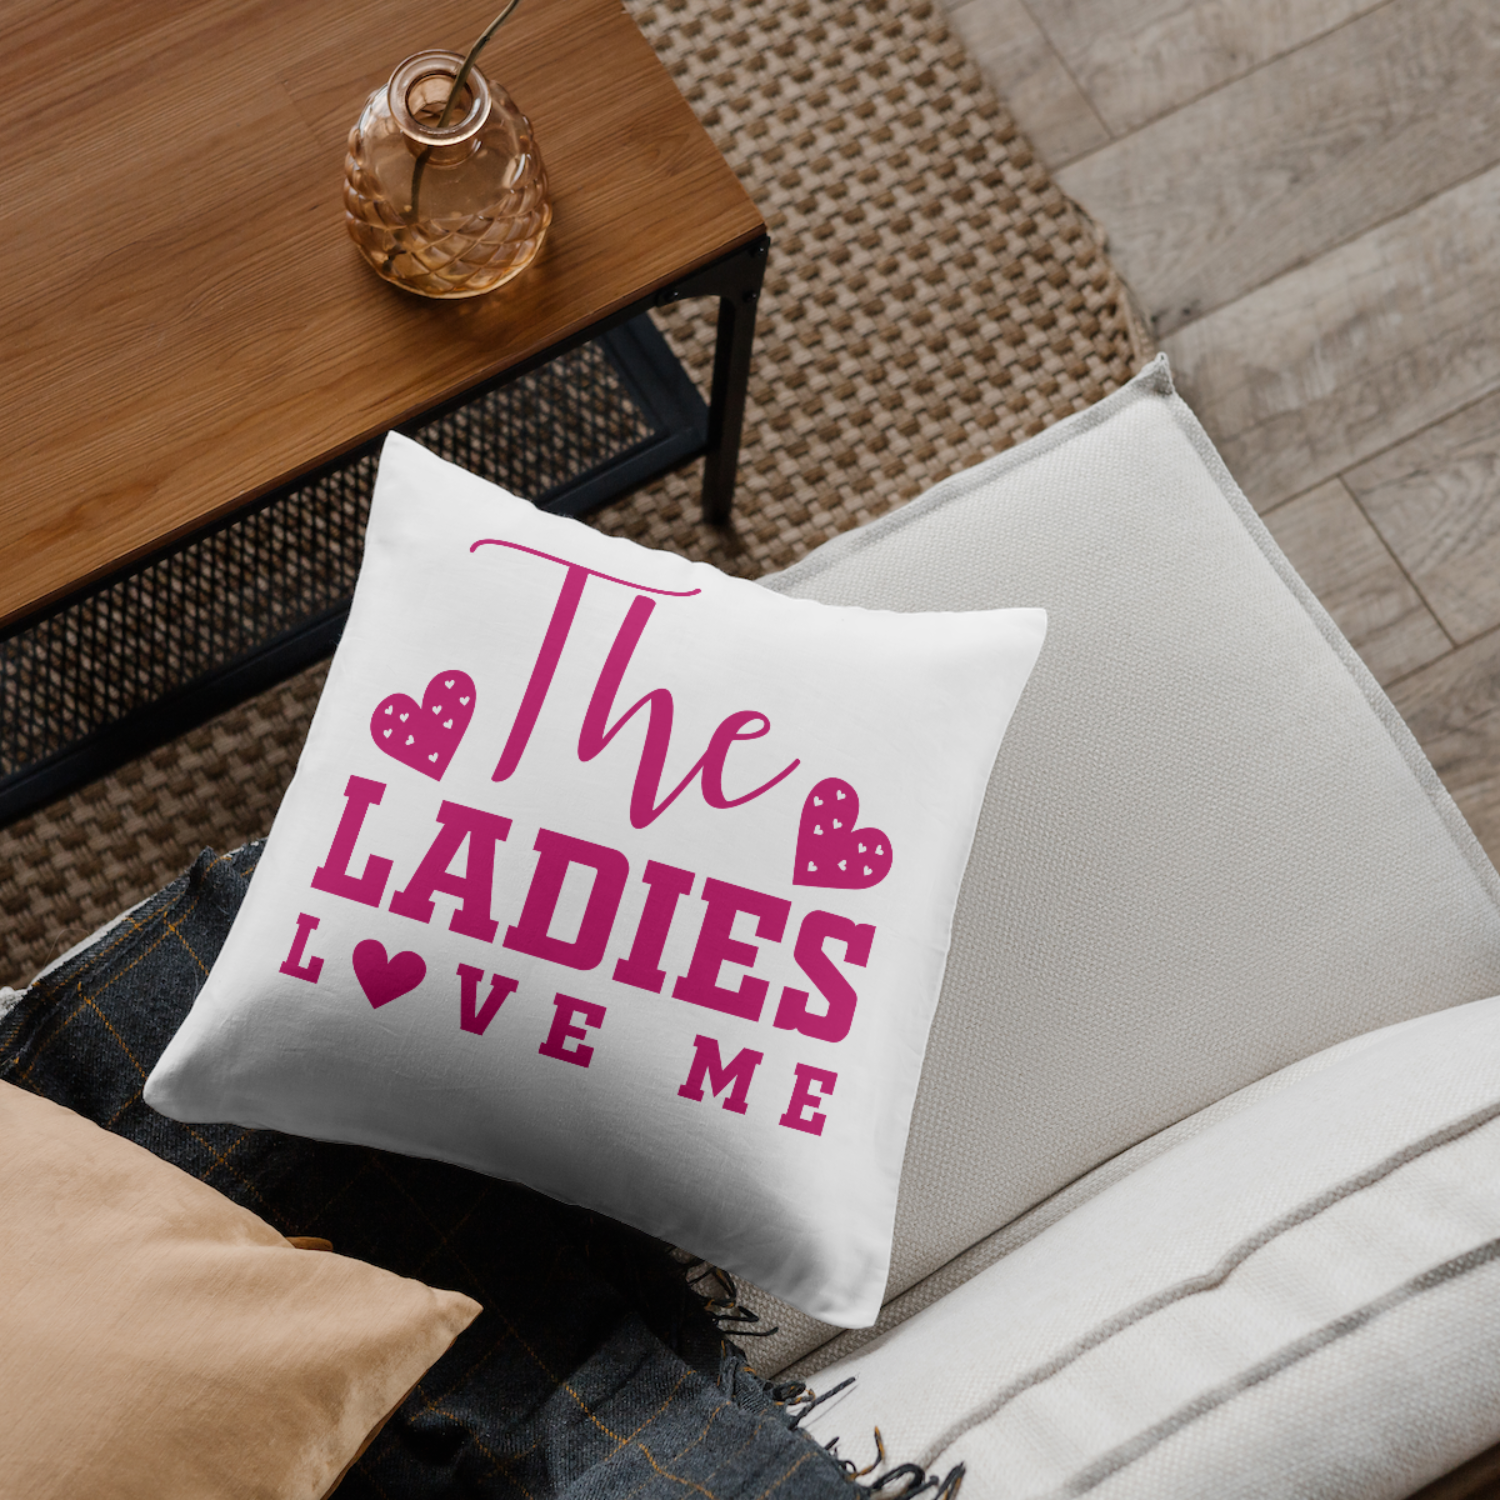 The Ladies love me SVG | Digital Download | Cut File | SVG Only The Sweet Stuff